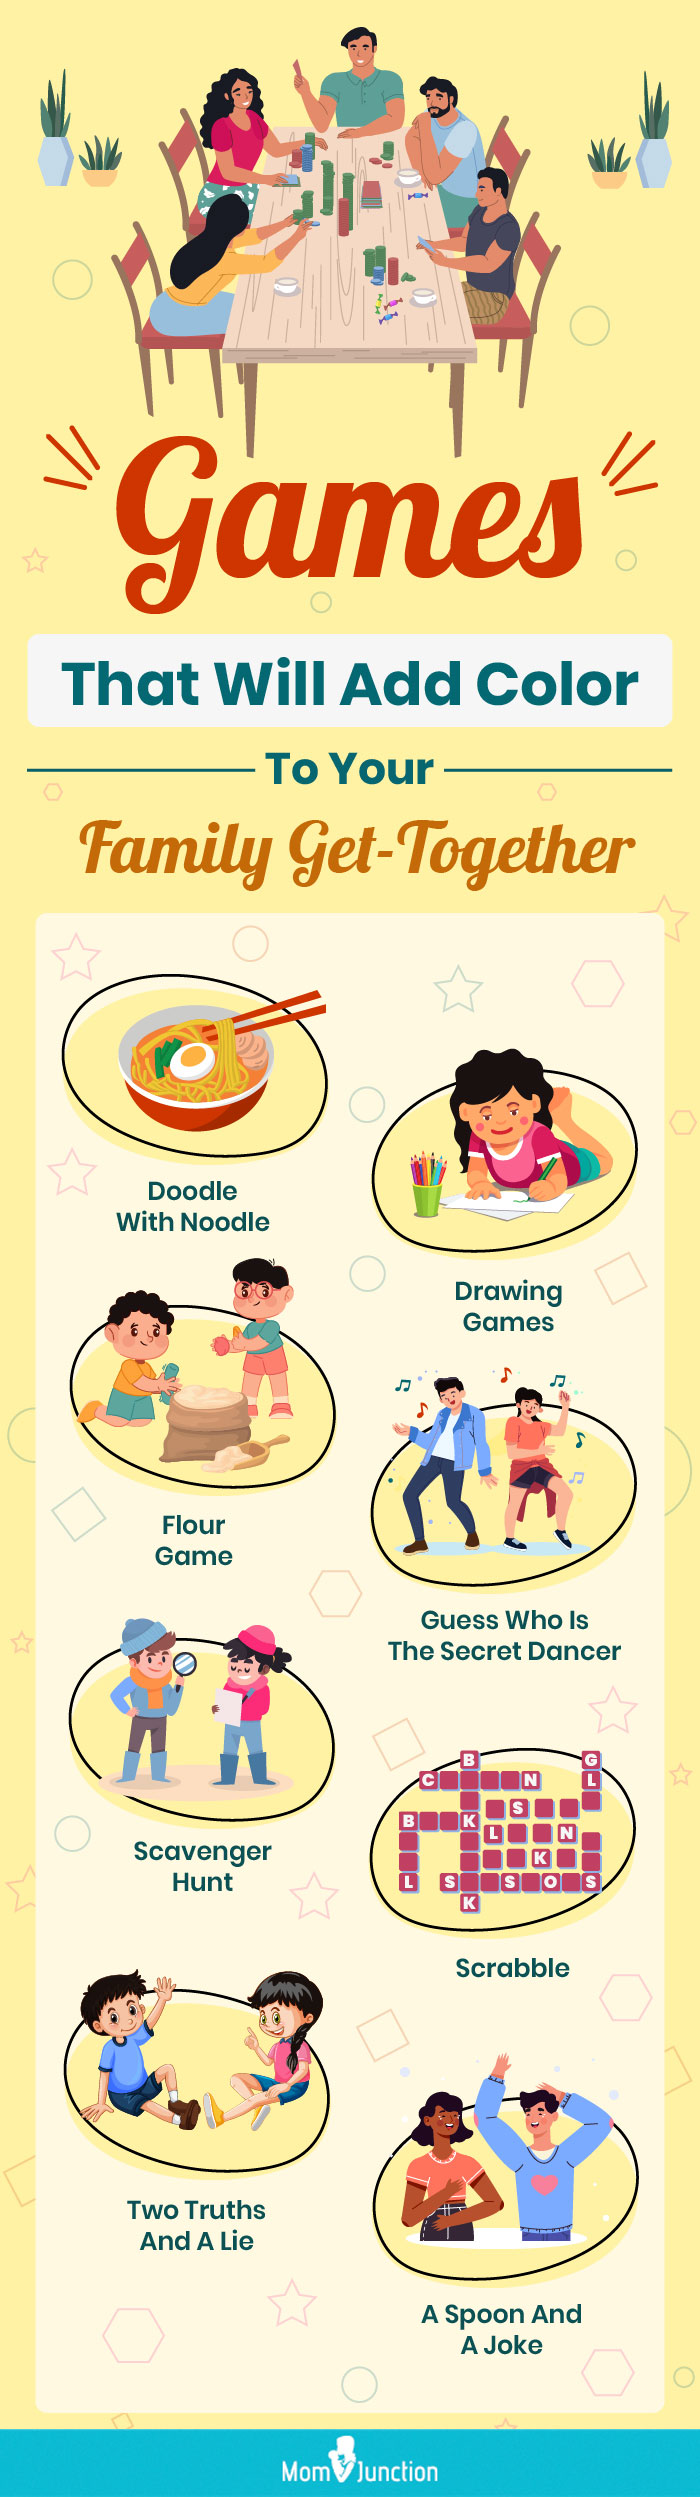 games that will add color to your family get-together [infographic]